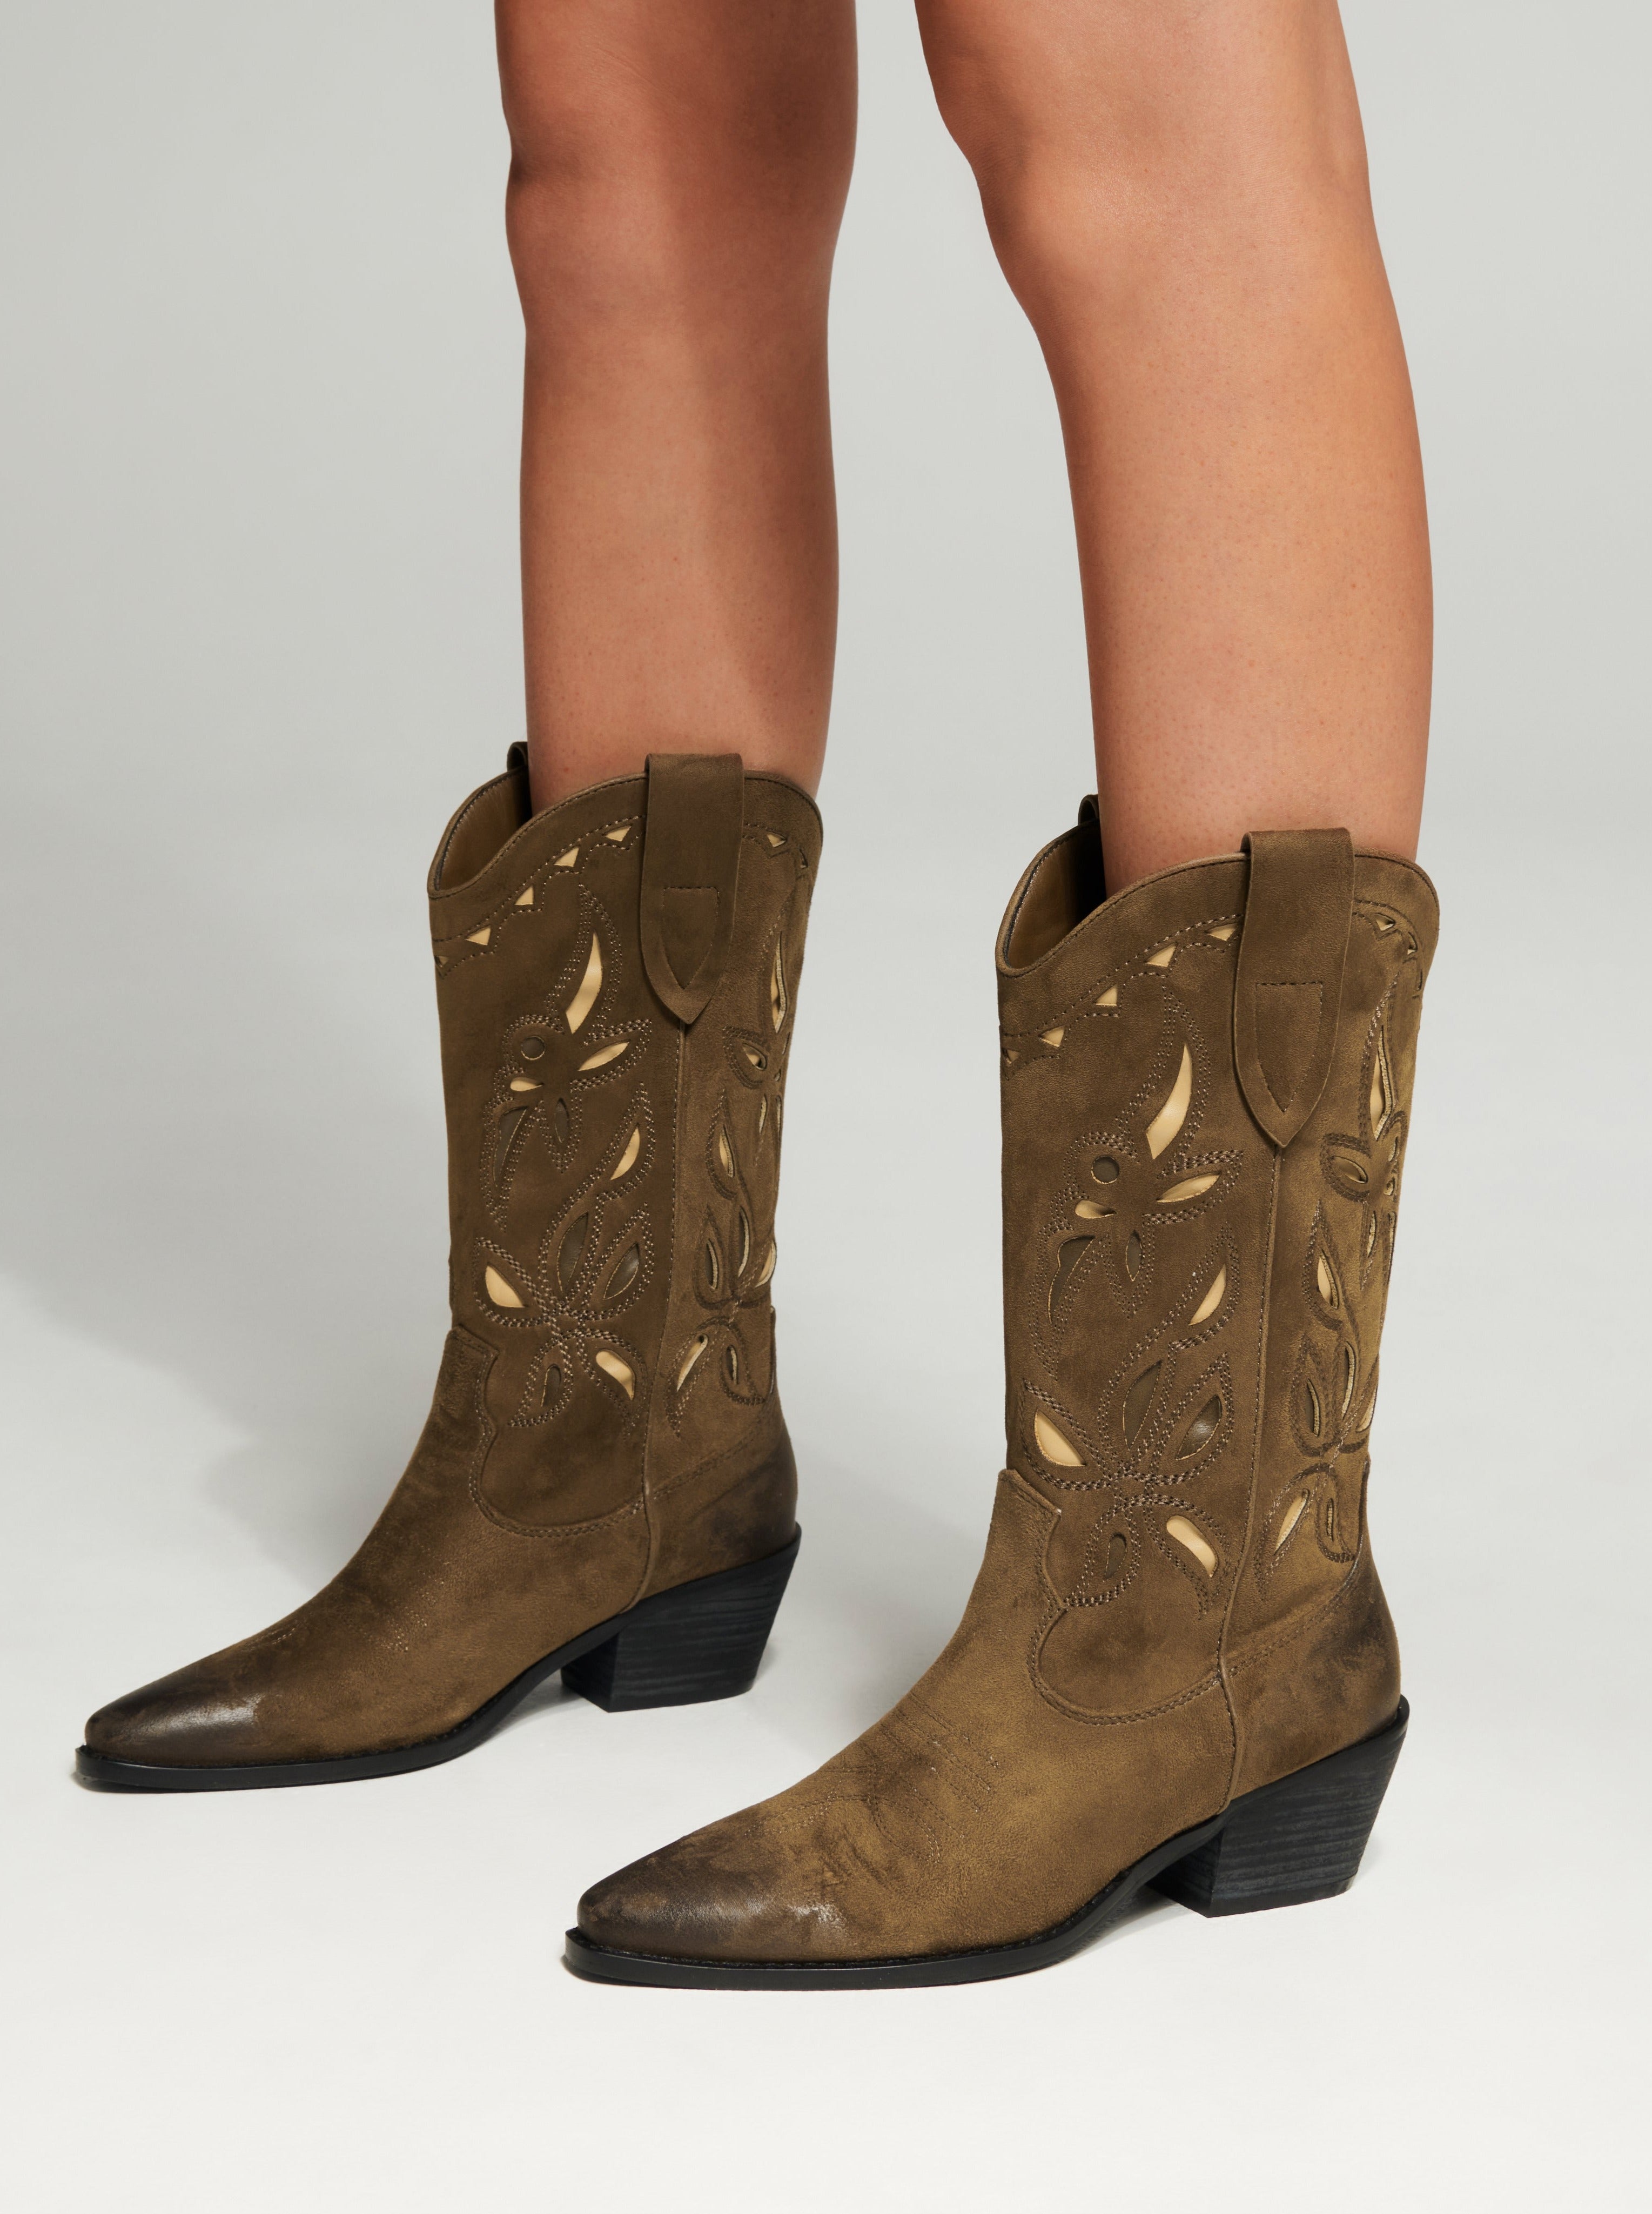 Therapy Shoes Miley Taupe | Women's Boots | Western | Cowboy | Tall